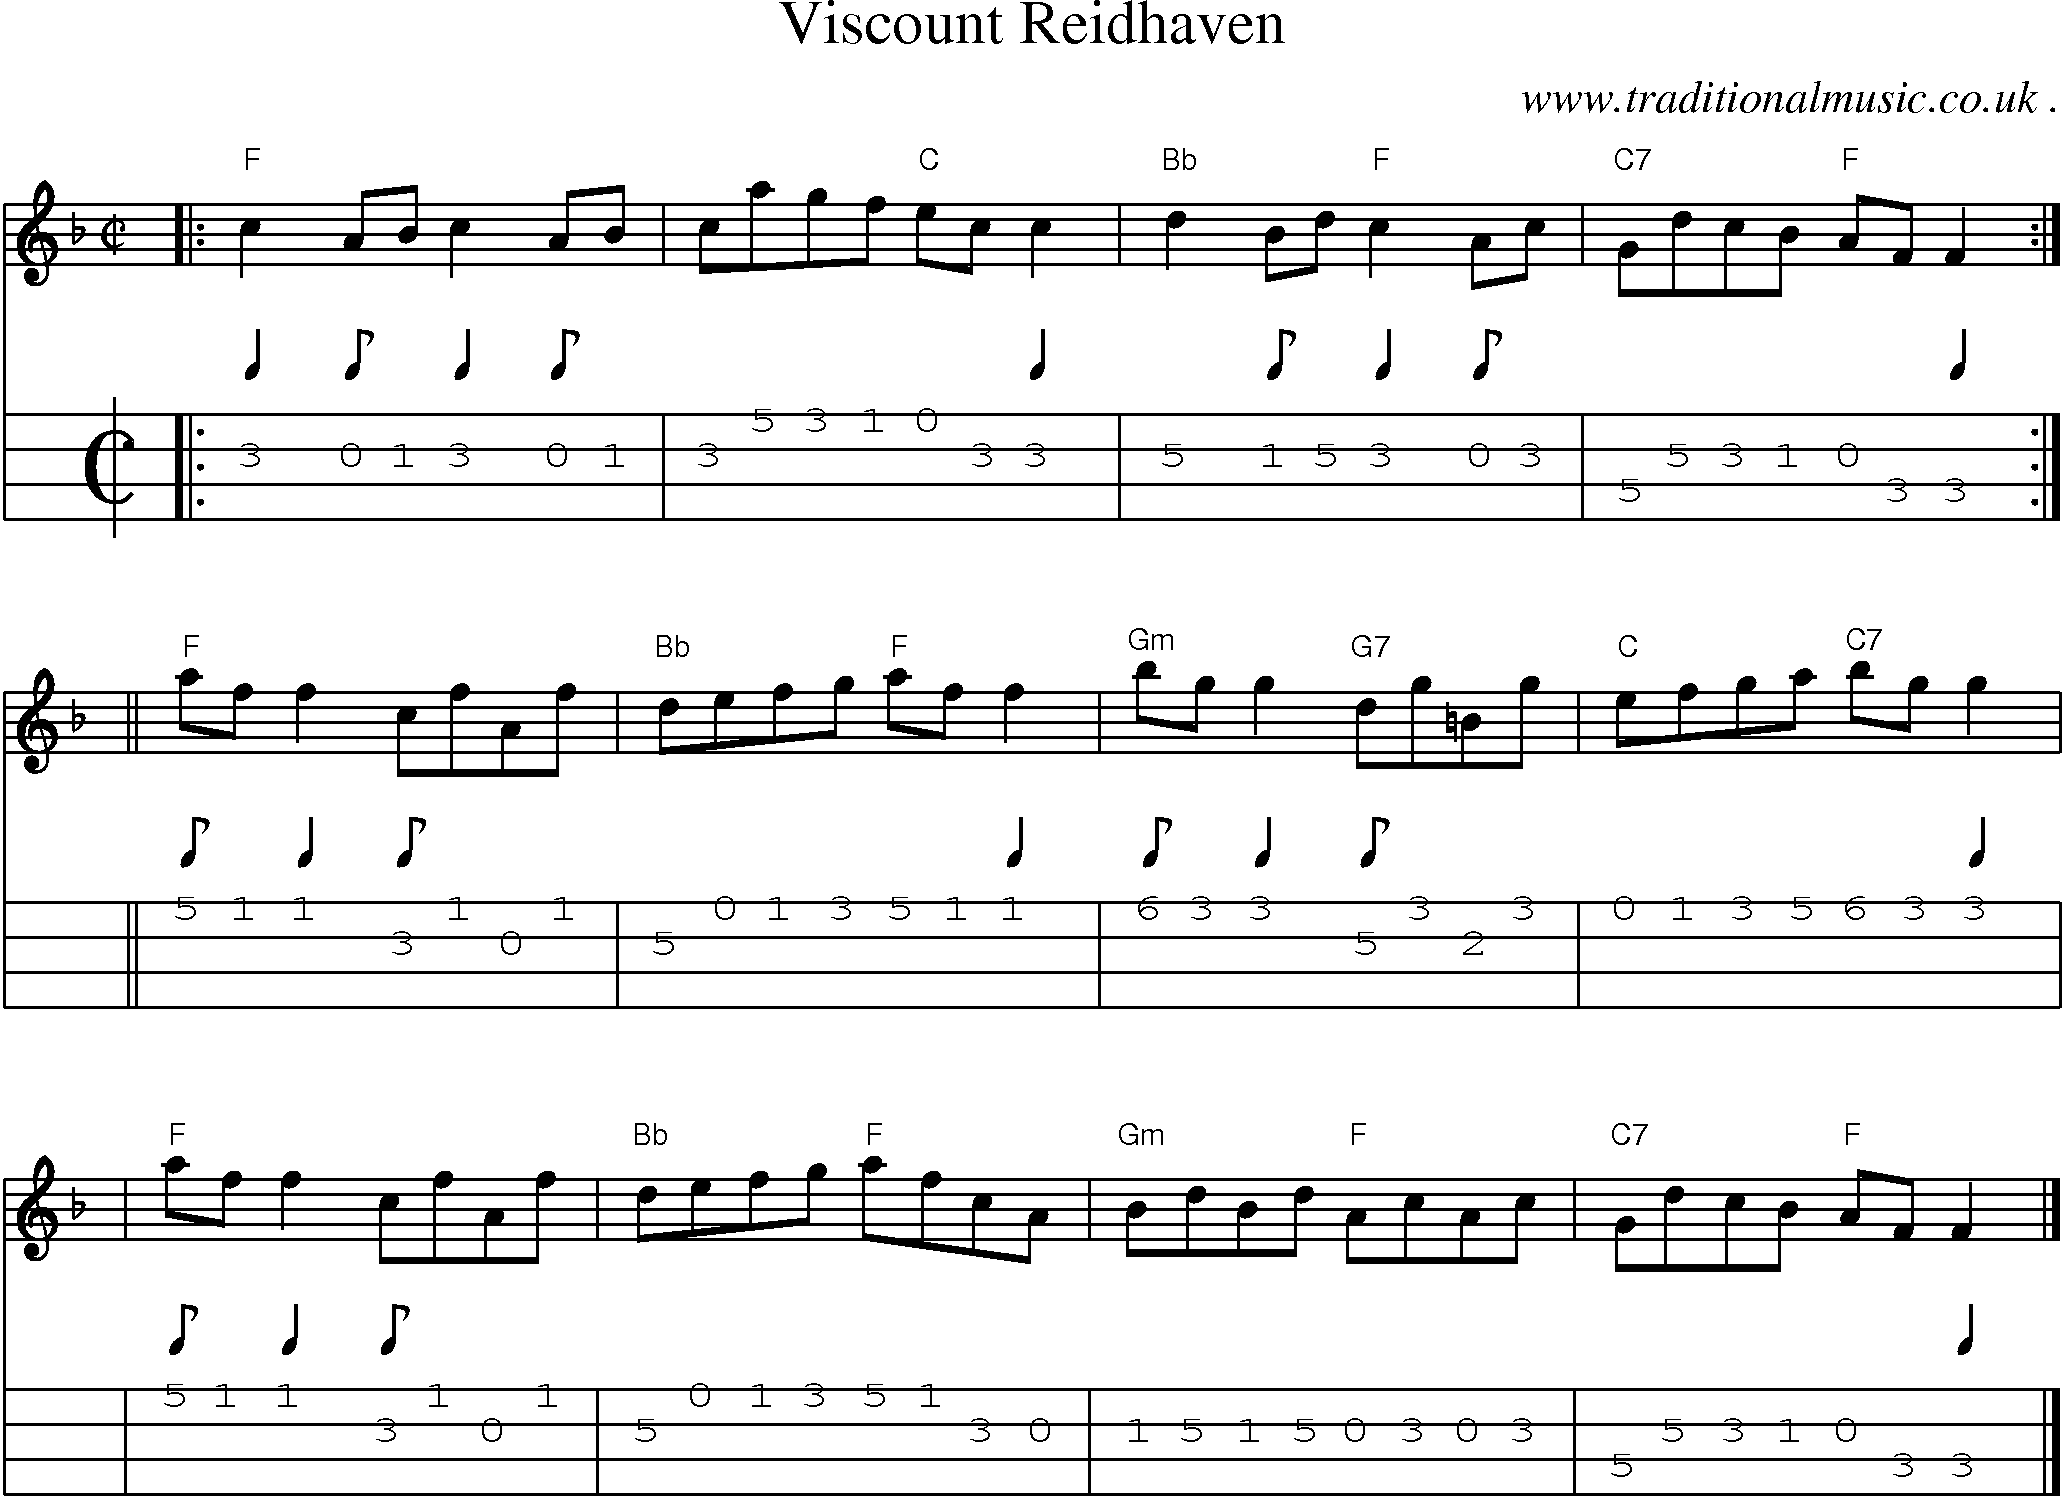 Sheet-music  score, Chords and Mandolin Tabs for Viscount Reidhaven